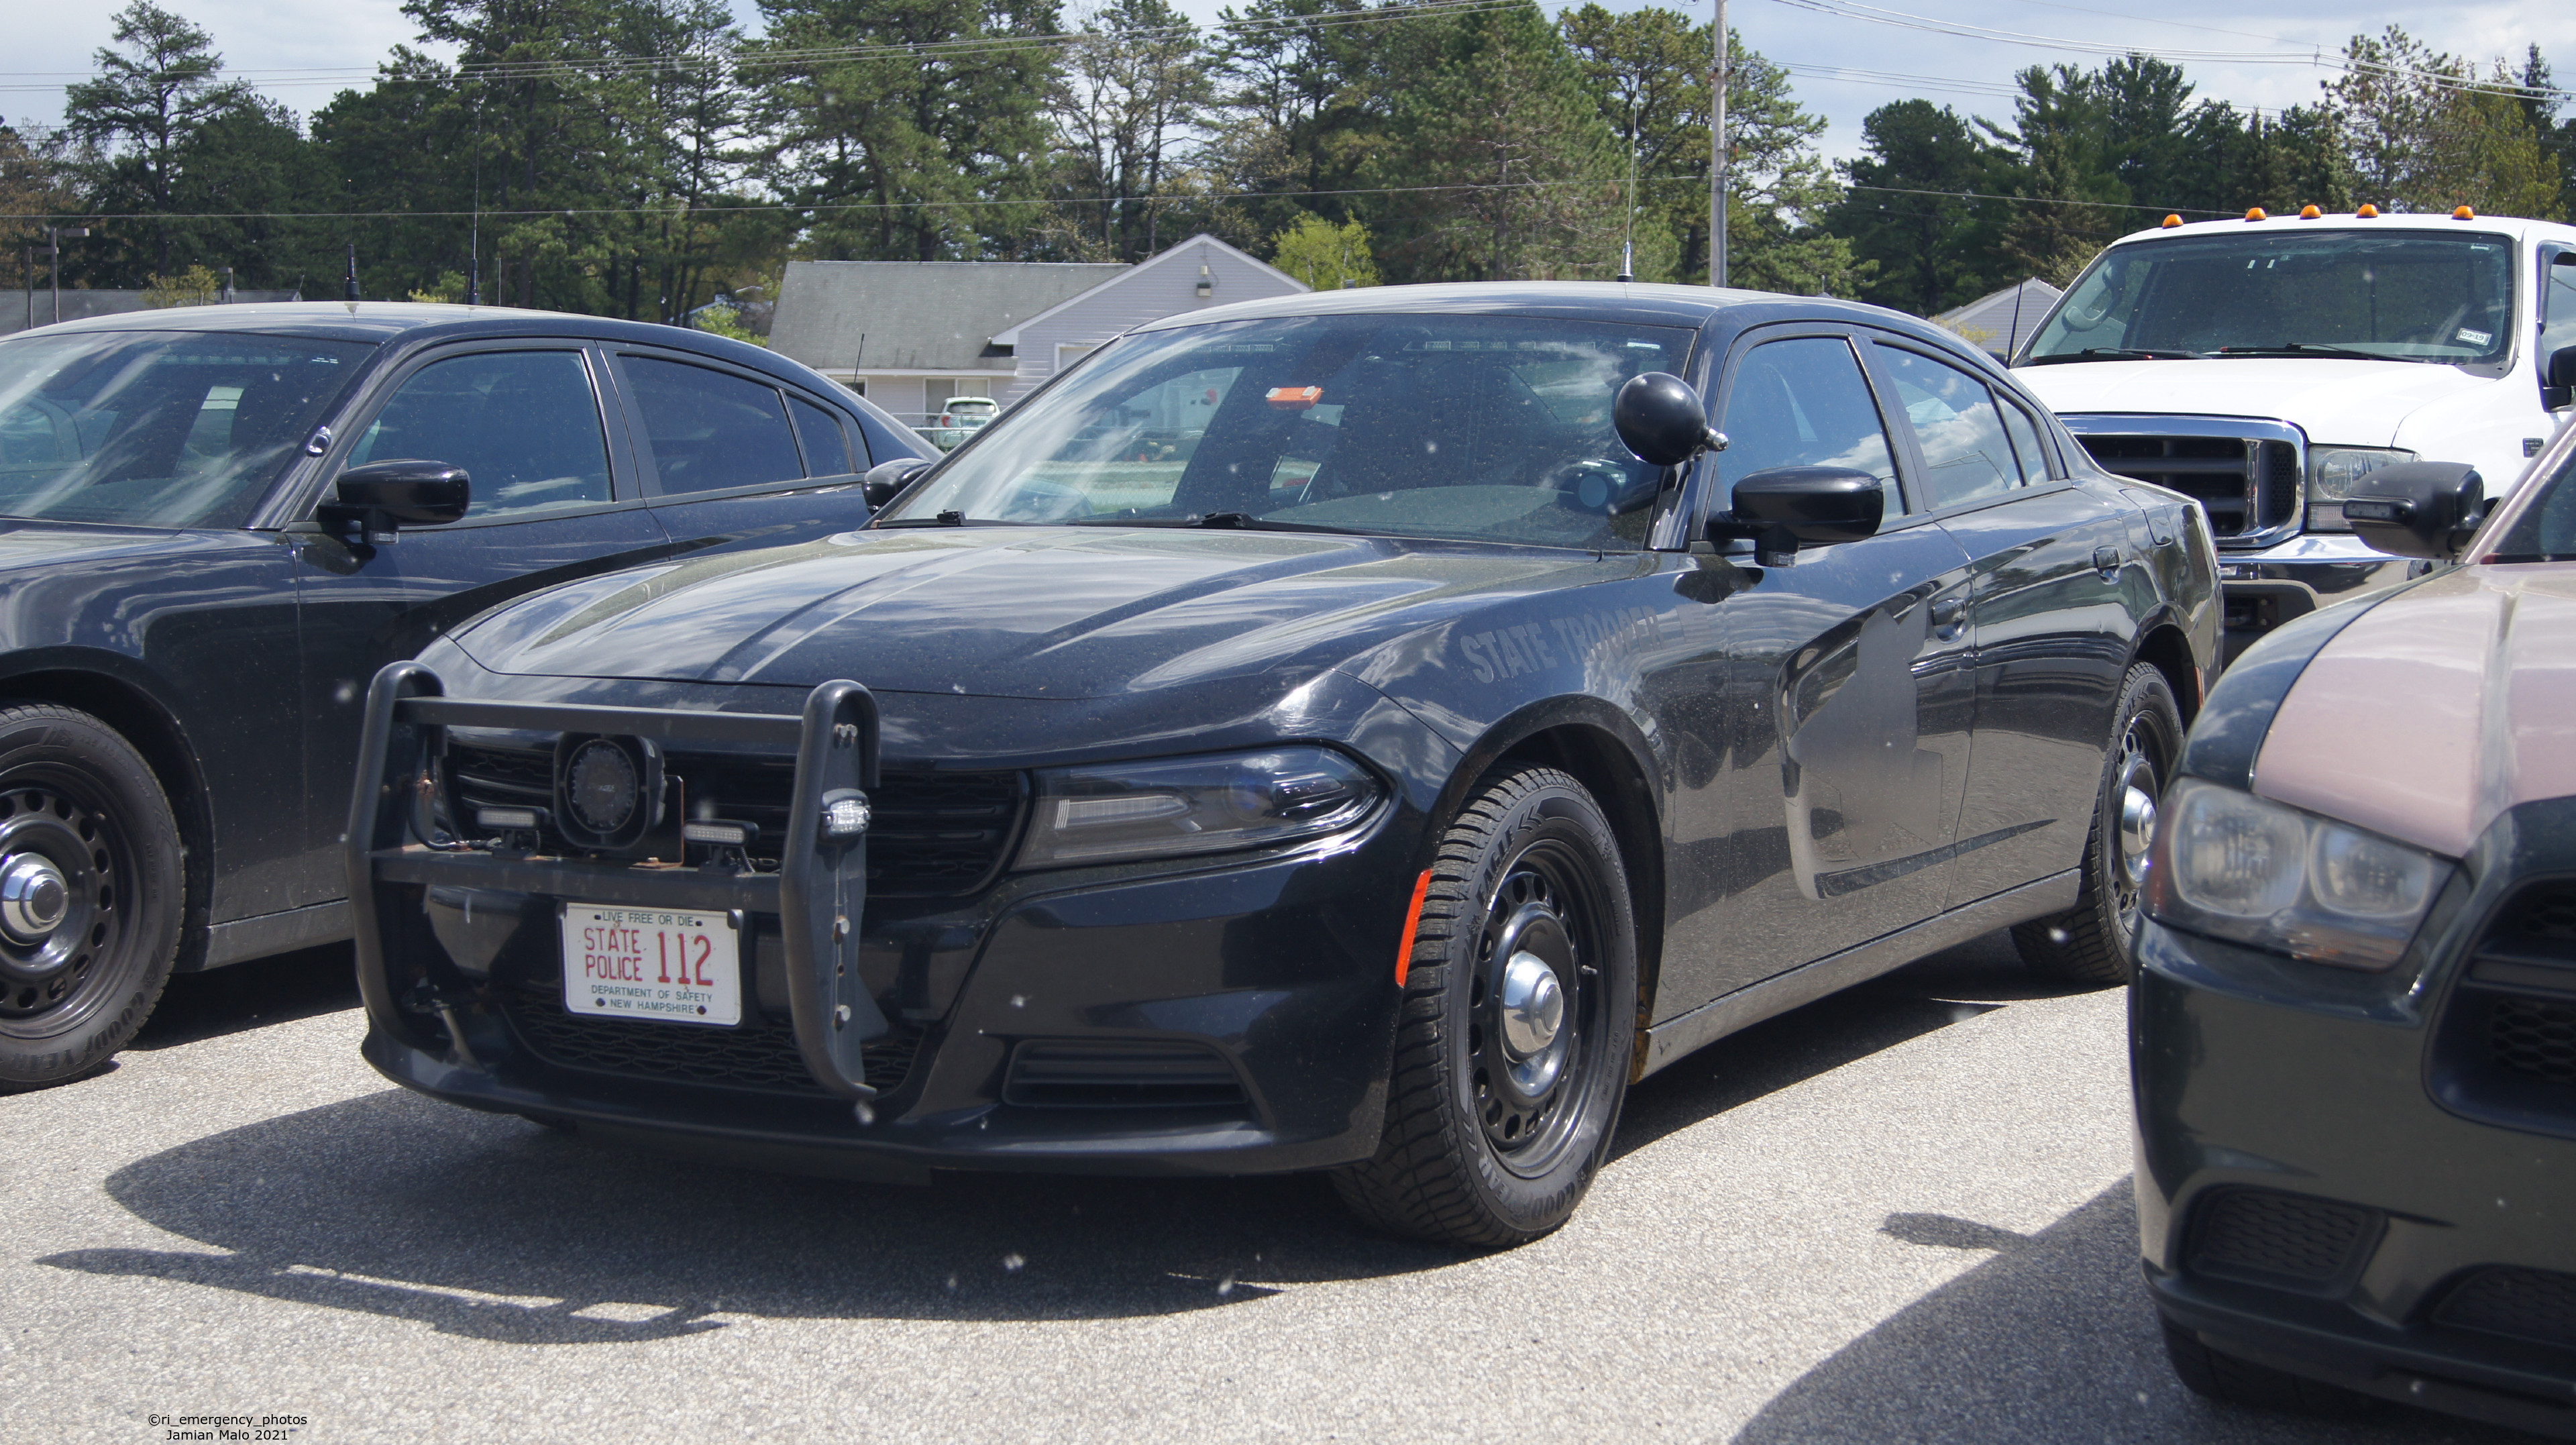 A photo  of New Hampshire State Police
            Cruiser 112, a 2015-2016 Dodge Charger             taken by Jamian Malo